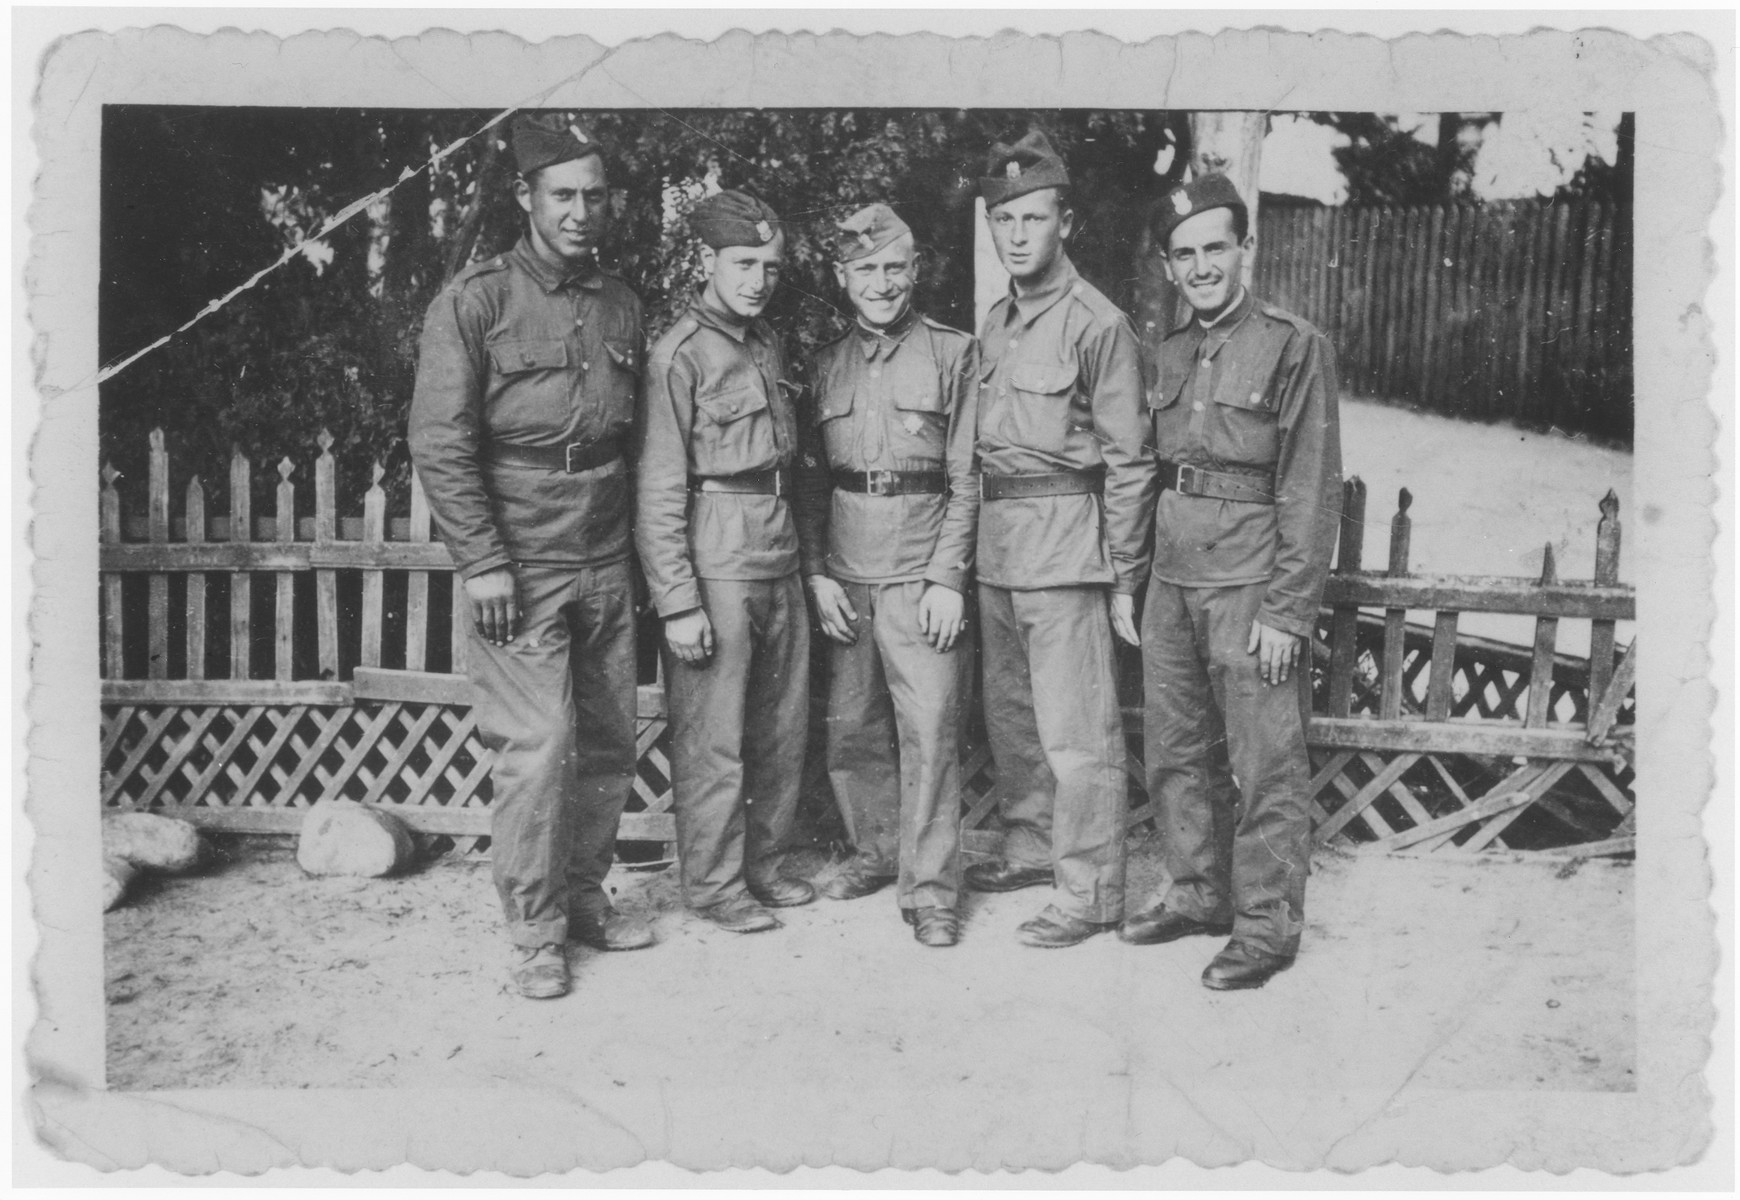 Group portrait of five Jewish soldiers serving in the Polish army.

Among those pictured is the brother of Abe Lajbman (second from the right).